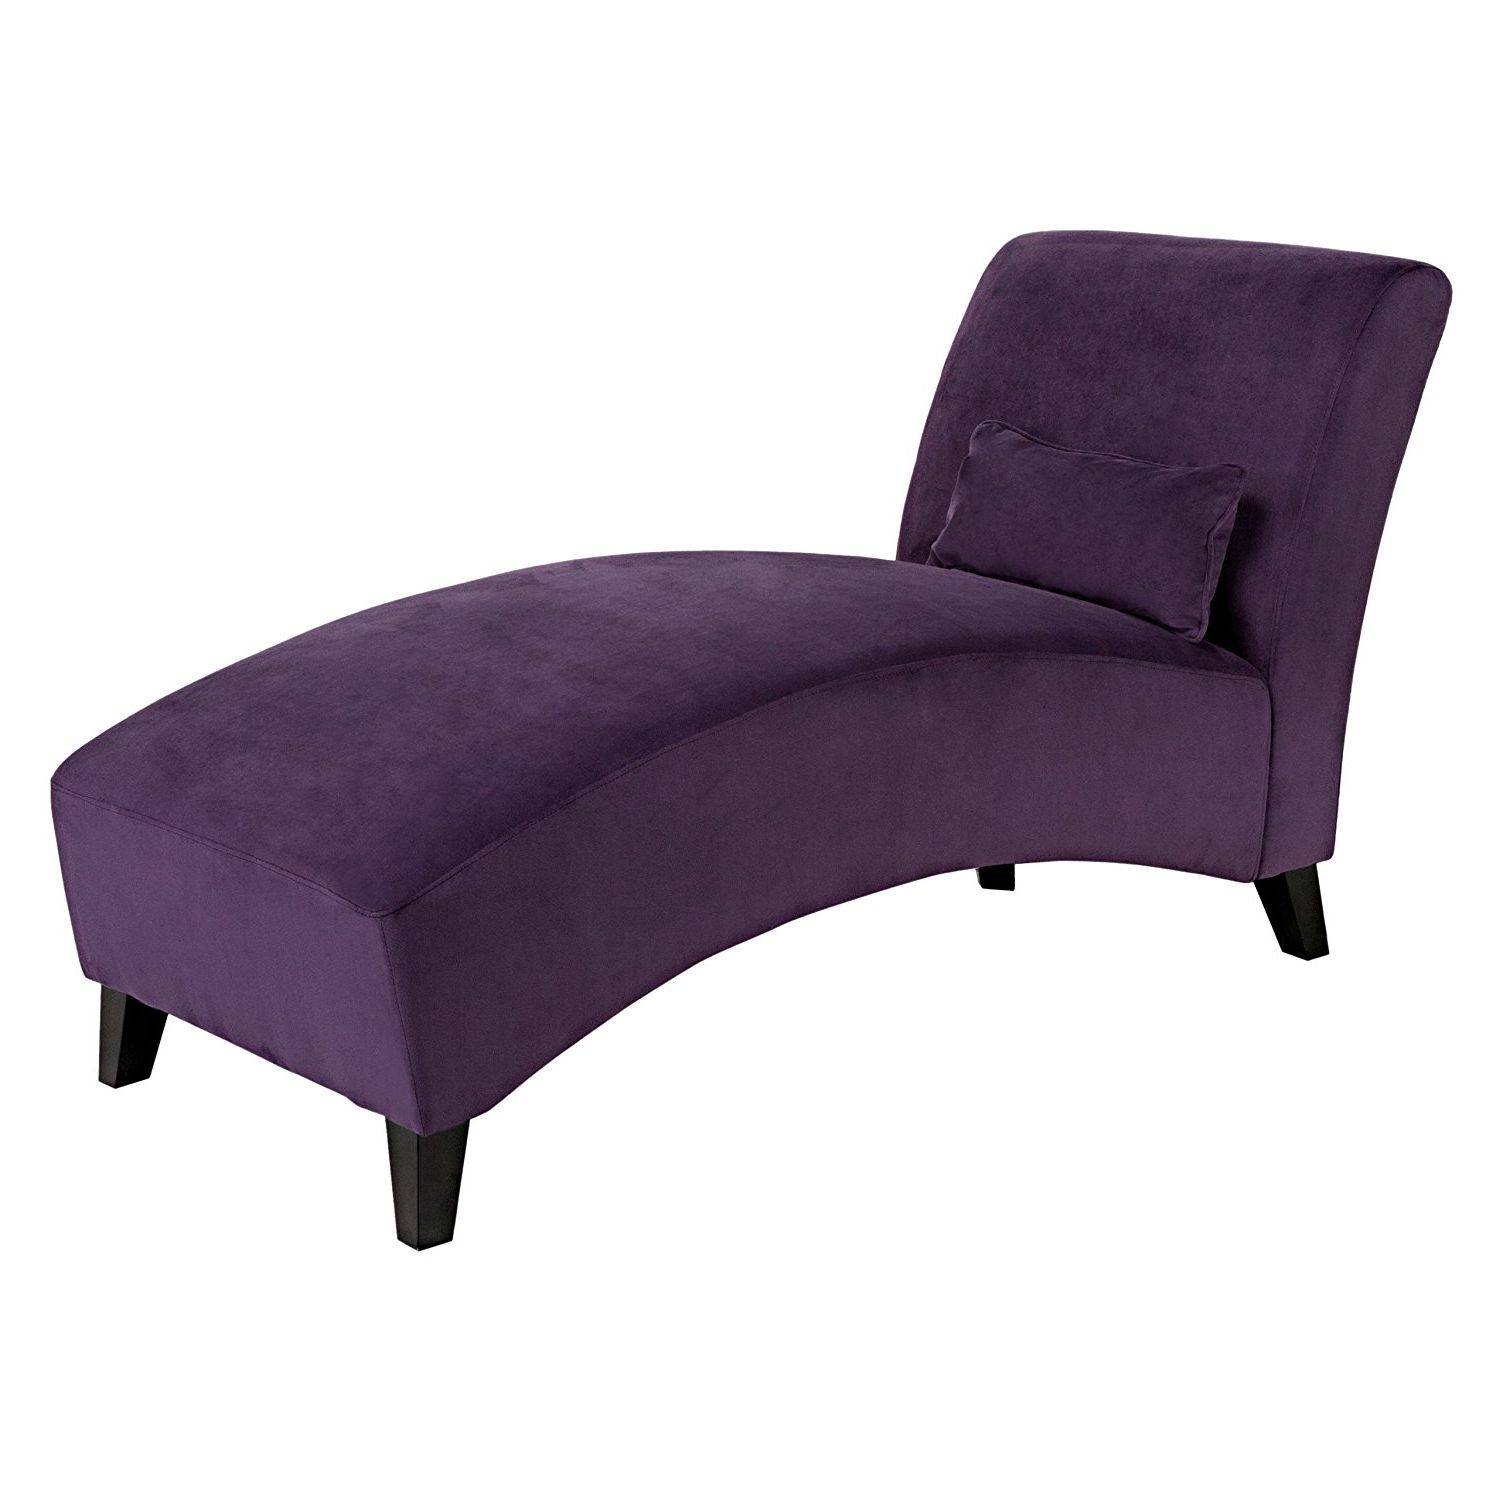 Amazon: Handy Living Chaise Lounge Chair, Purple: Kitchen & Dining Throughout Widely Used Chaise Lounge Chairs (Photo 11 of 15)